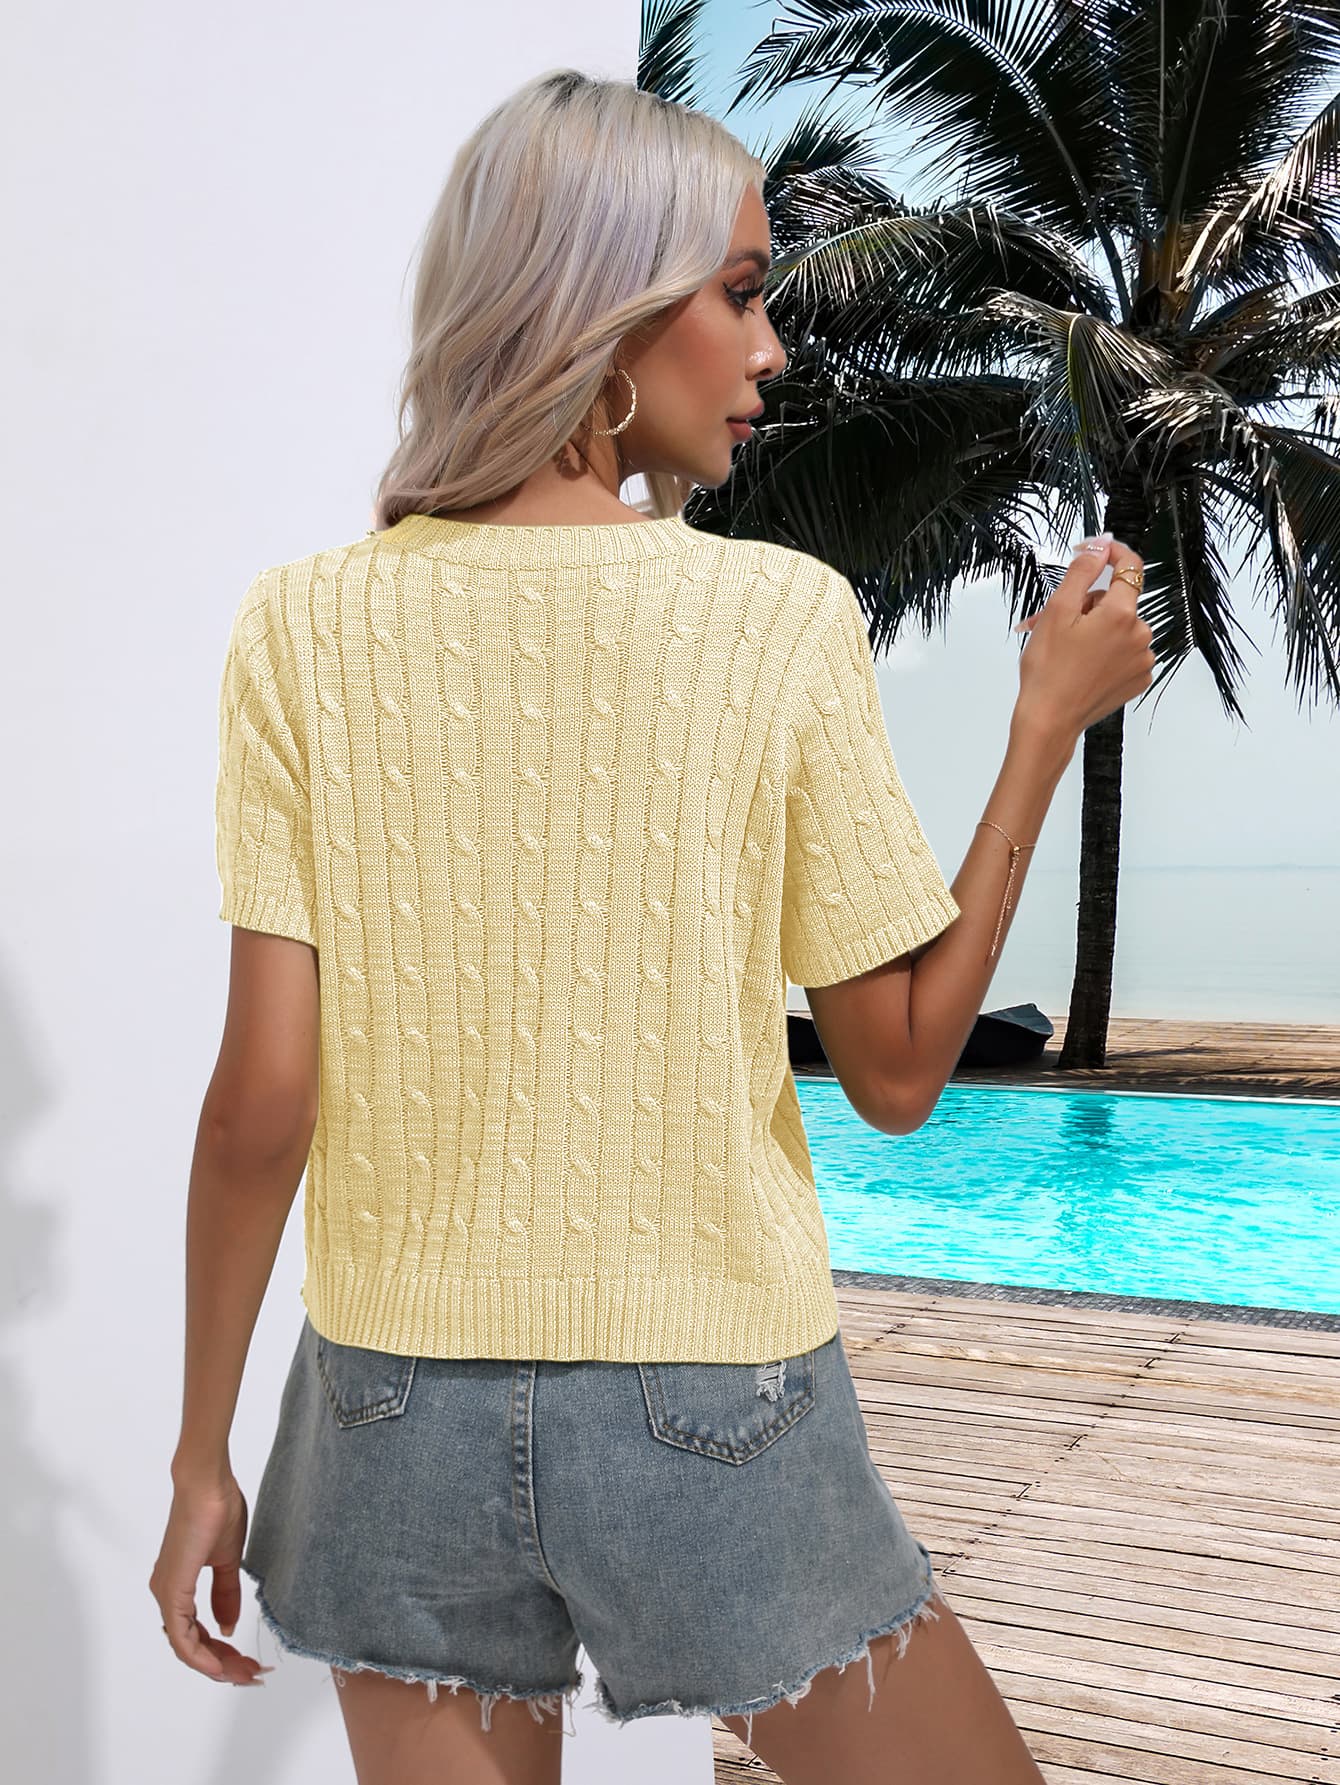 a woman standing next to a pool wearing a yellow sweater